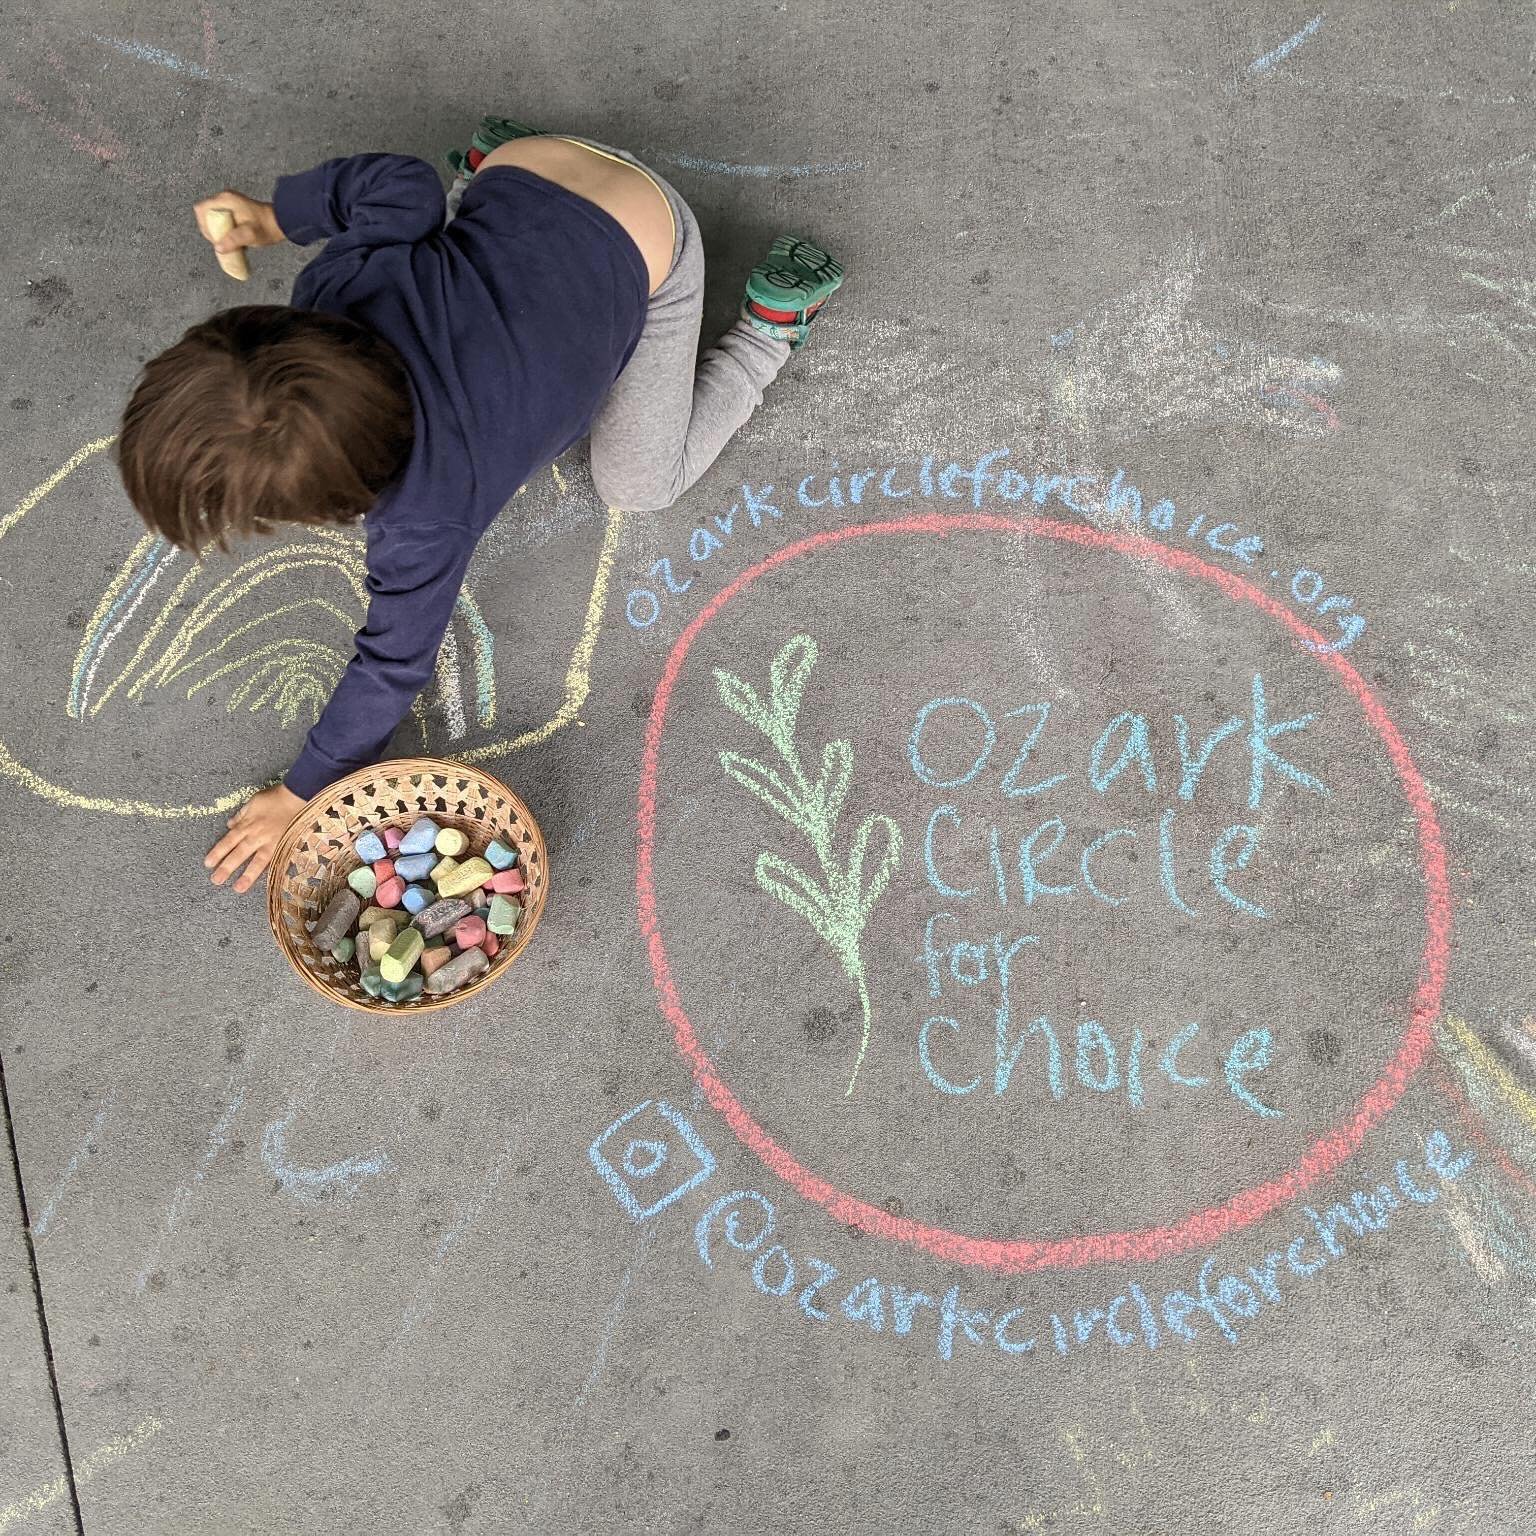 Happy Friday!! WE CAN HELP YOU GET AN ABORTION. @ozarknaturalfoods left the chalk out for us and we couldn&rsquo;t help ourselves since exposure is key. If folks don&rsquo;t know we exist, they don&rsquo;t know that we can help. 
If you&rsquo;d like 